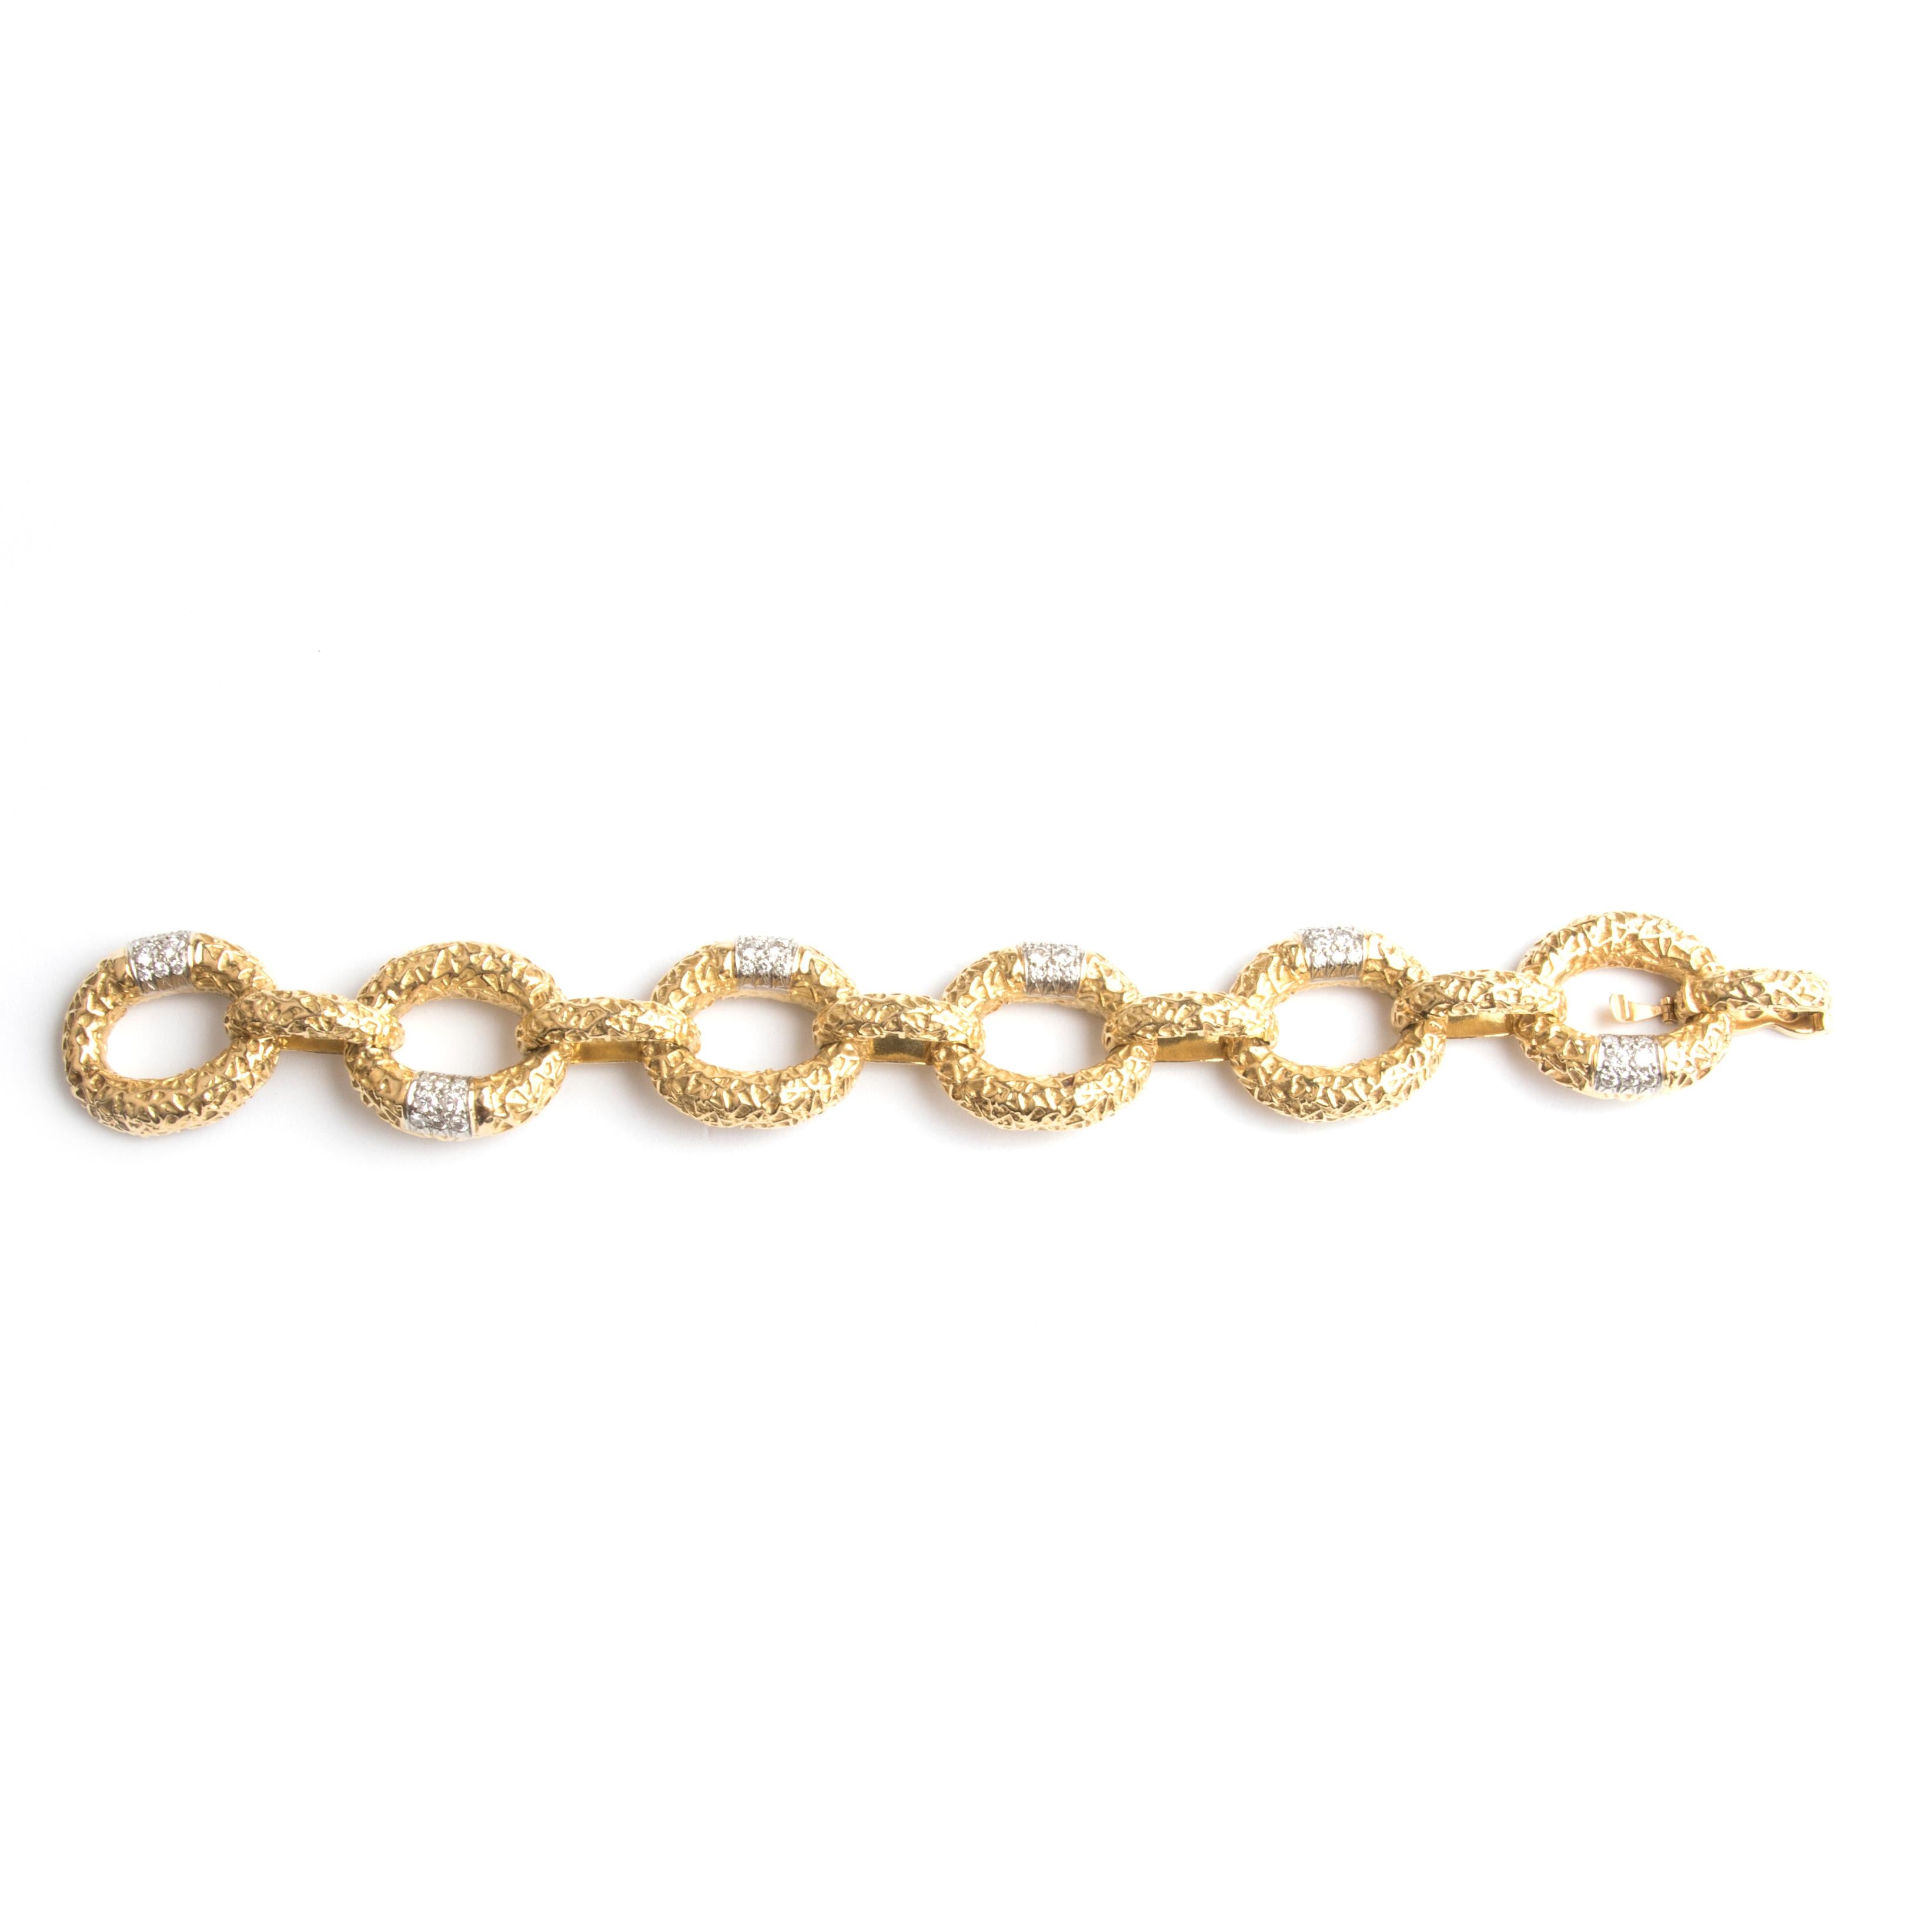 18 Karat Yellow Gold and Diamond Link Bracelet by Van Cleef & Arpels In Good Condition For Sale In London, GB